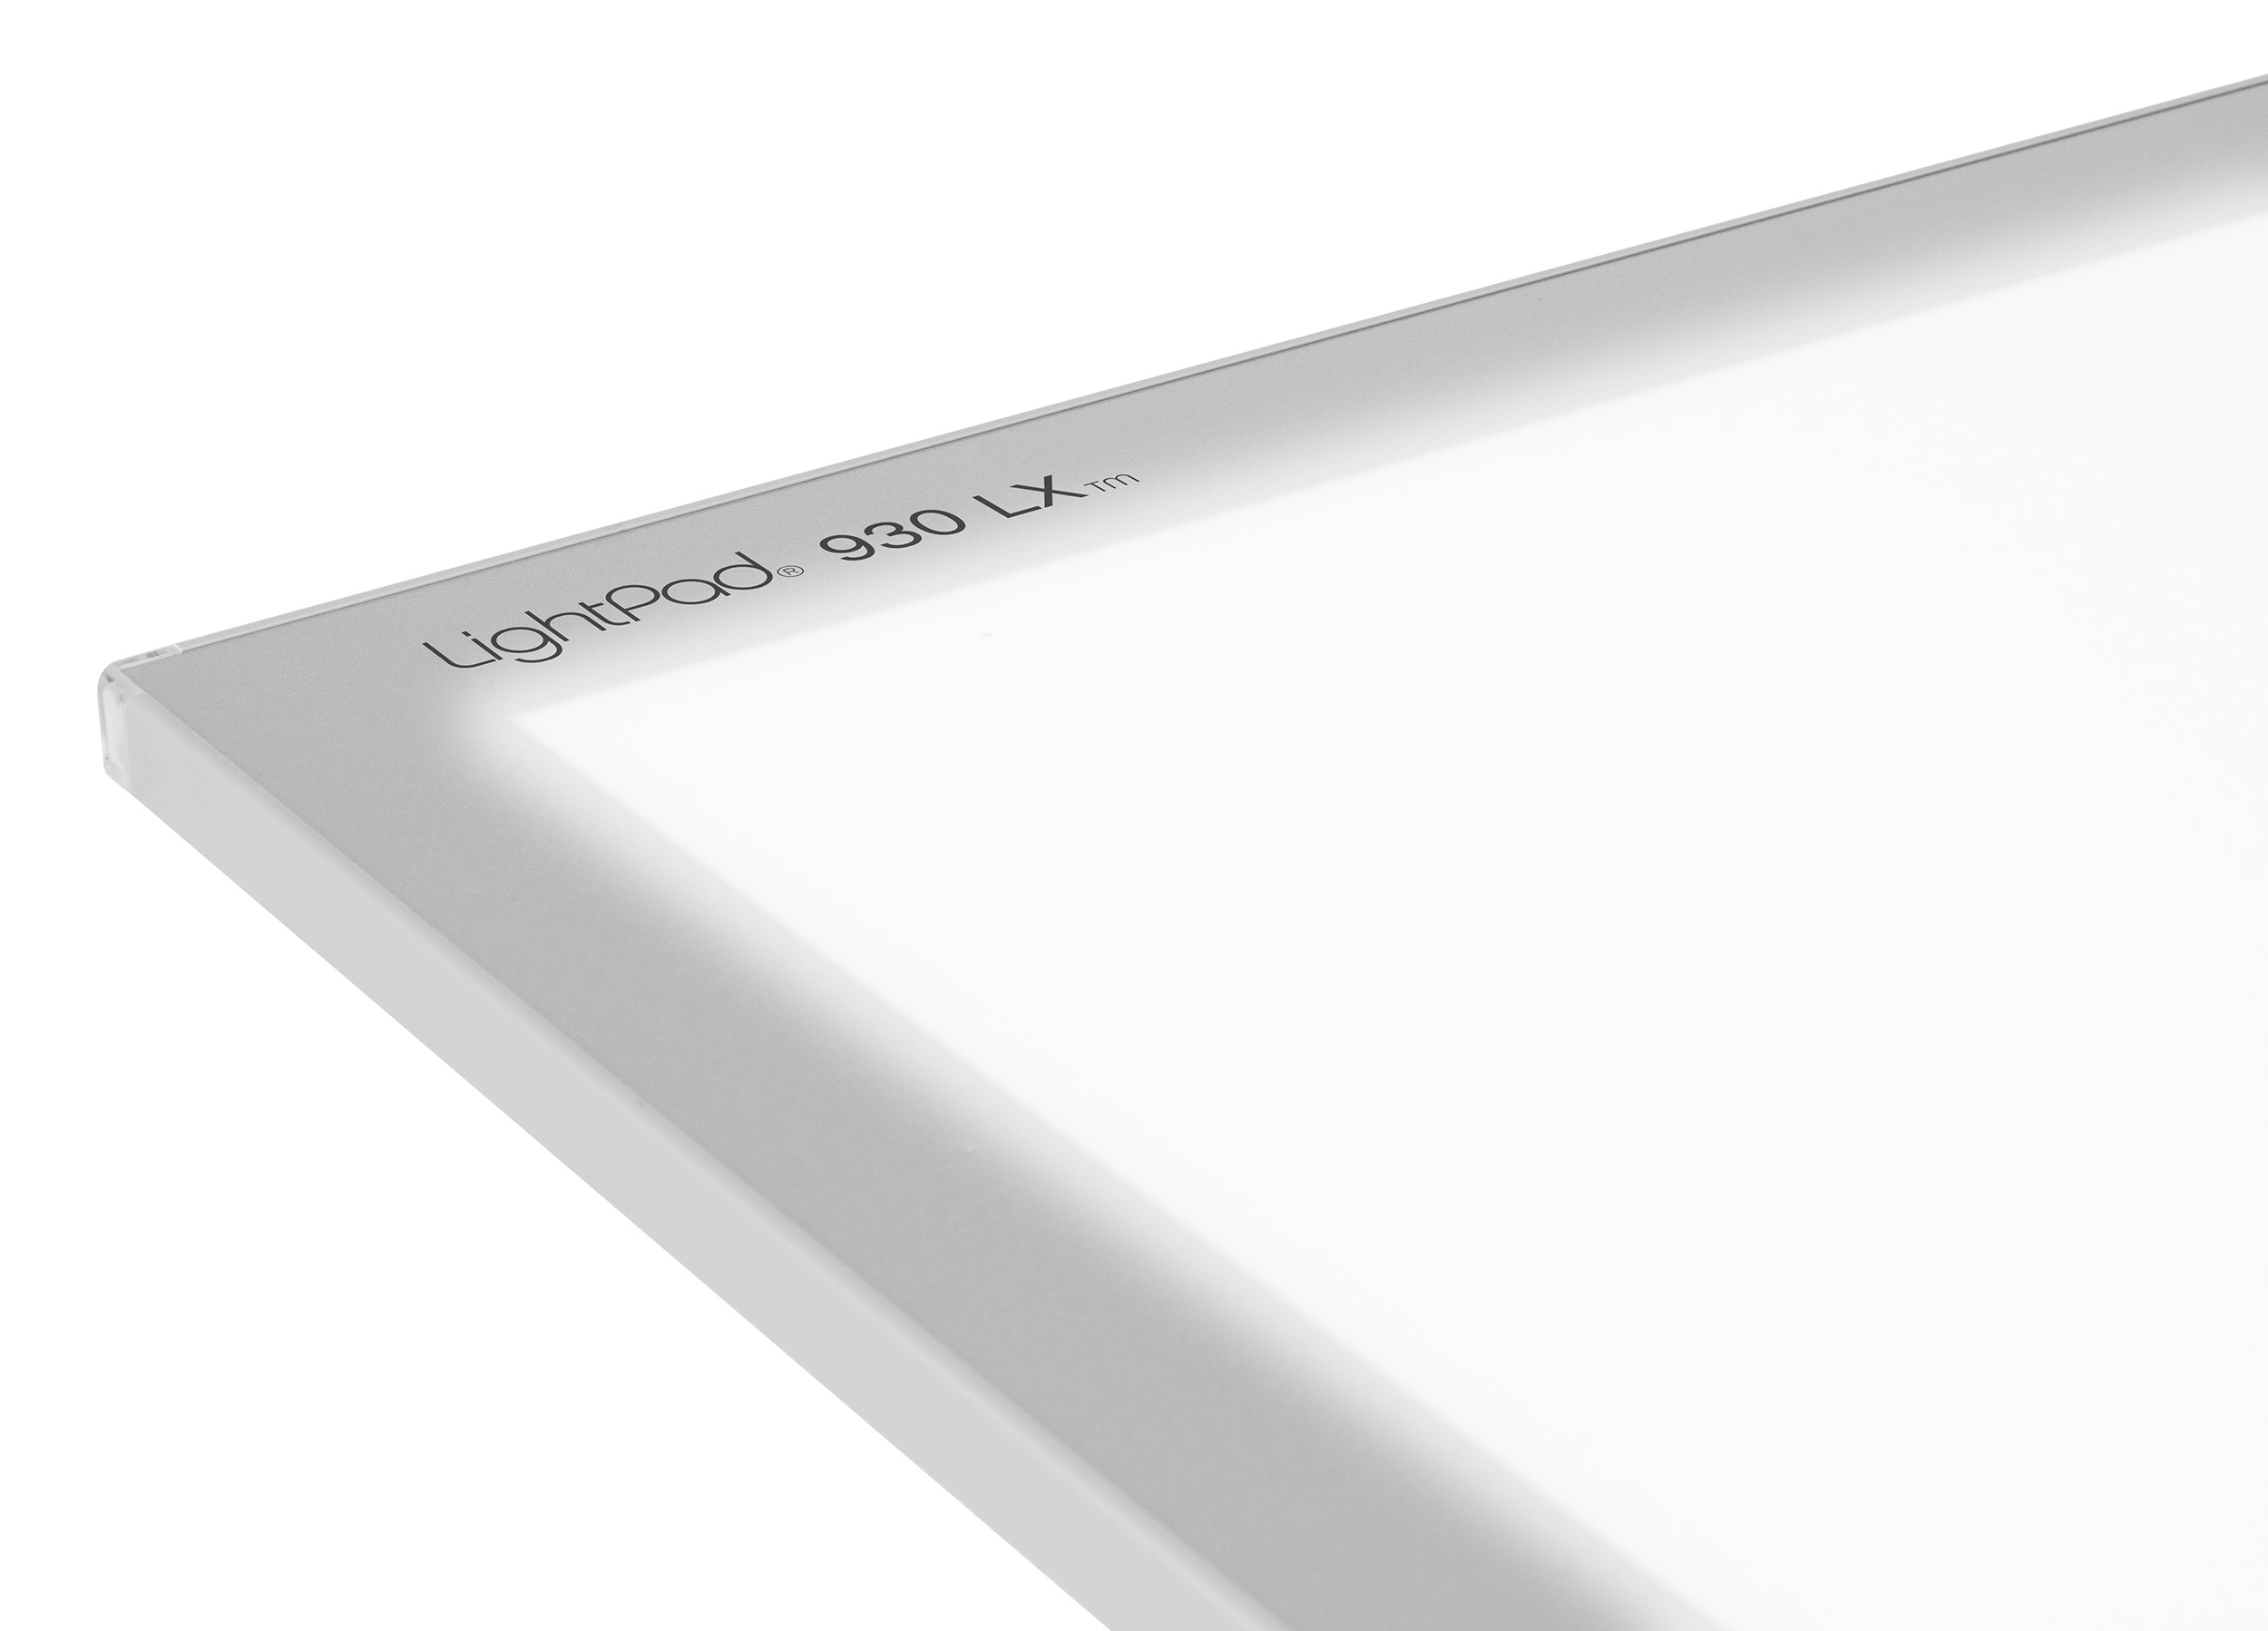 Artograph LightPad® 930 LX - 12" x 9" Thin, Dimmable LED Light Box for Tracing, Drawing - image 3 of 7